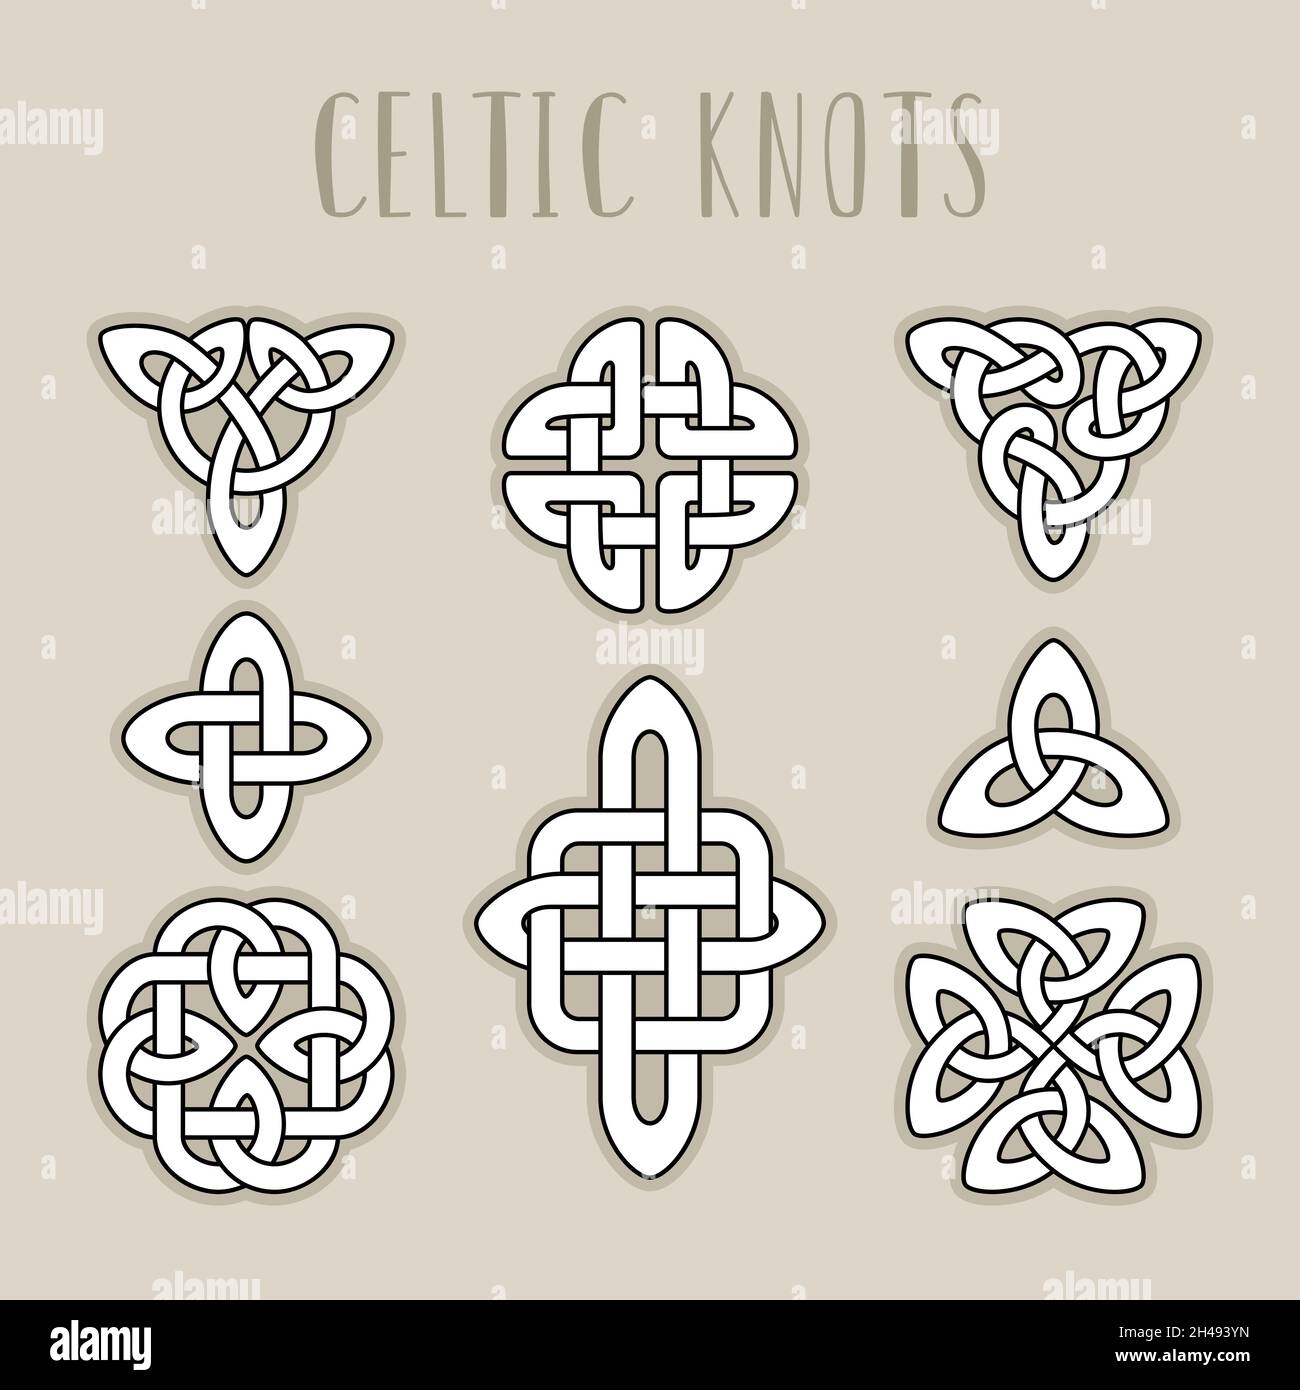 Scottish medieval symbols. Scotland celtic knot spiral signes, traditional celt braid patterns, irish endlessness signs vector ornaments, buddhist infinity elements isolated Stock Vector